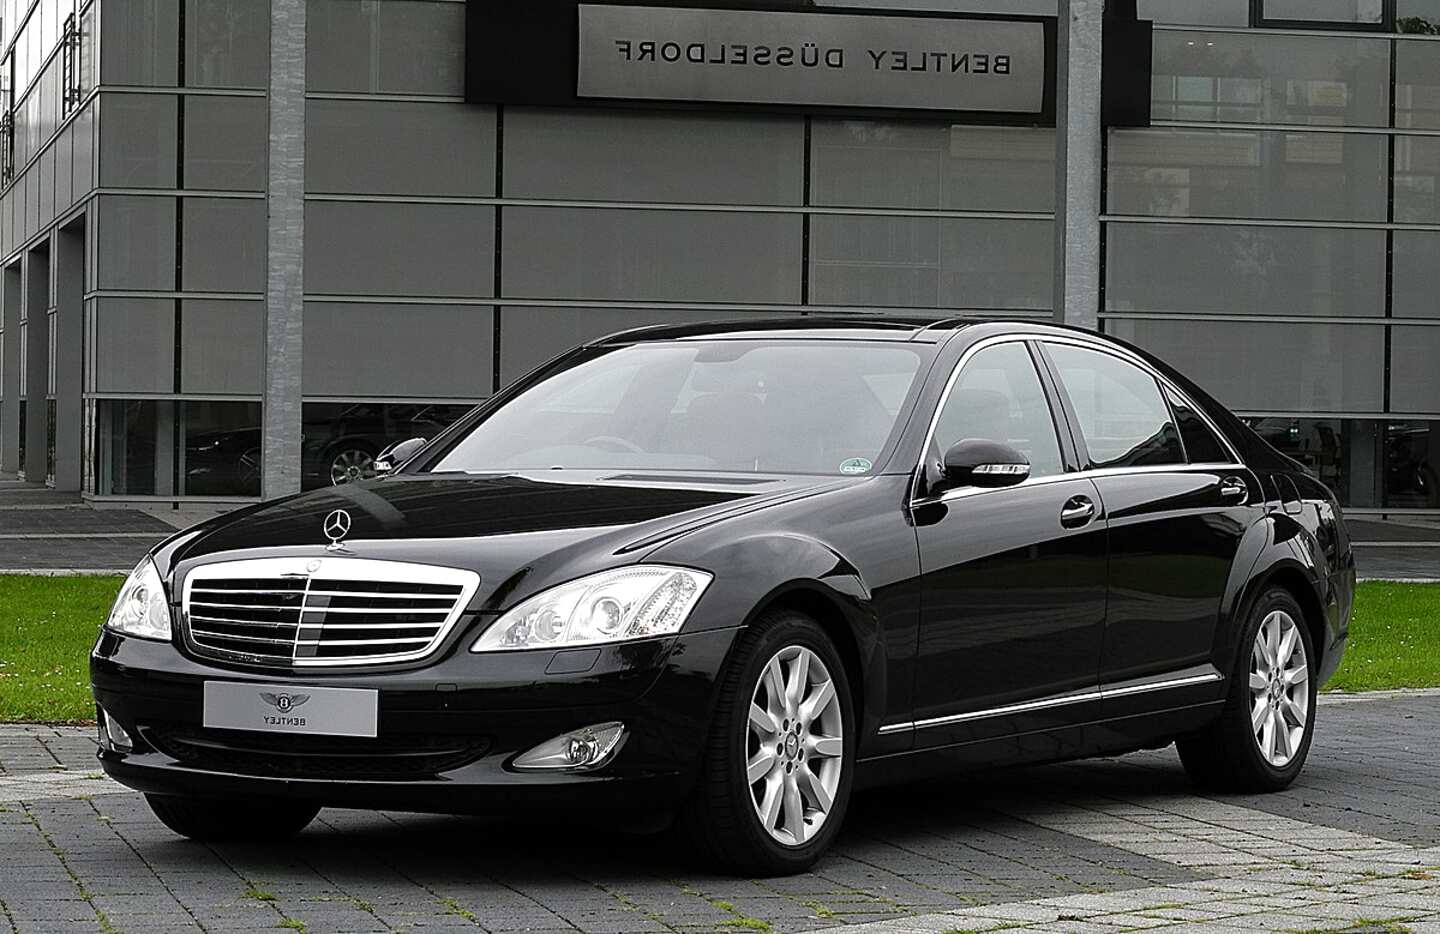 Mercedes S Class W221 for sale in UK View 44 bargains